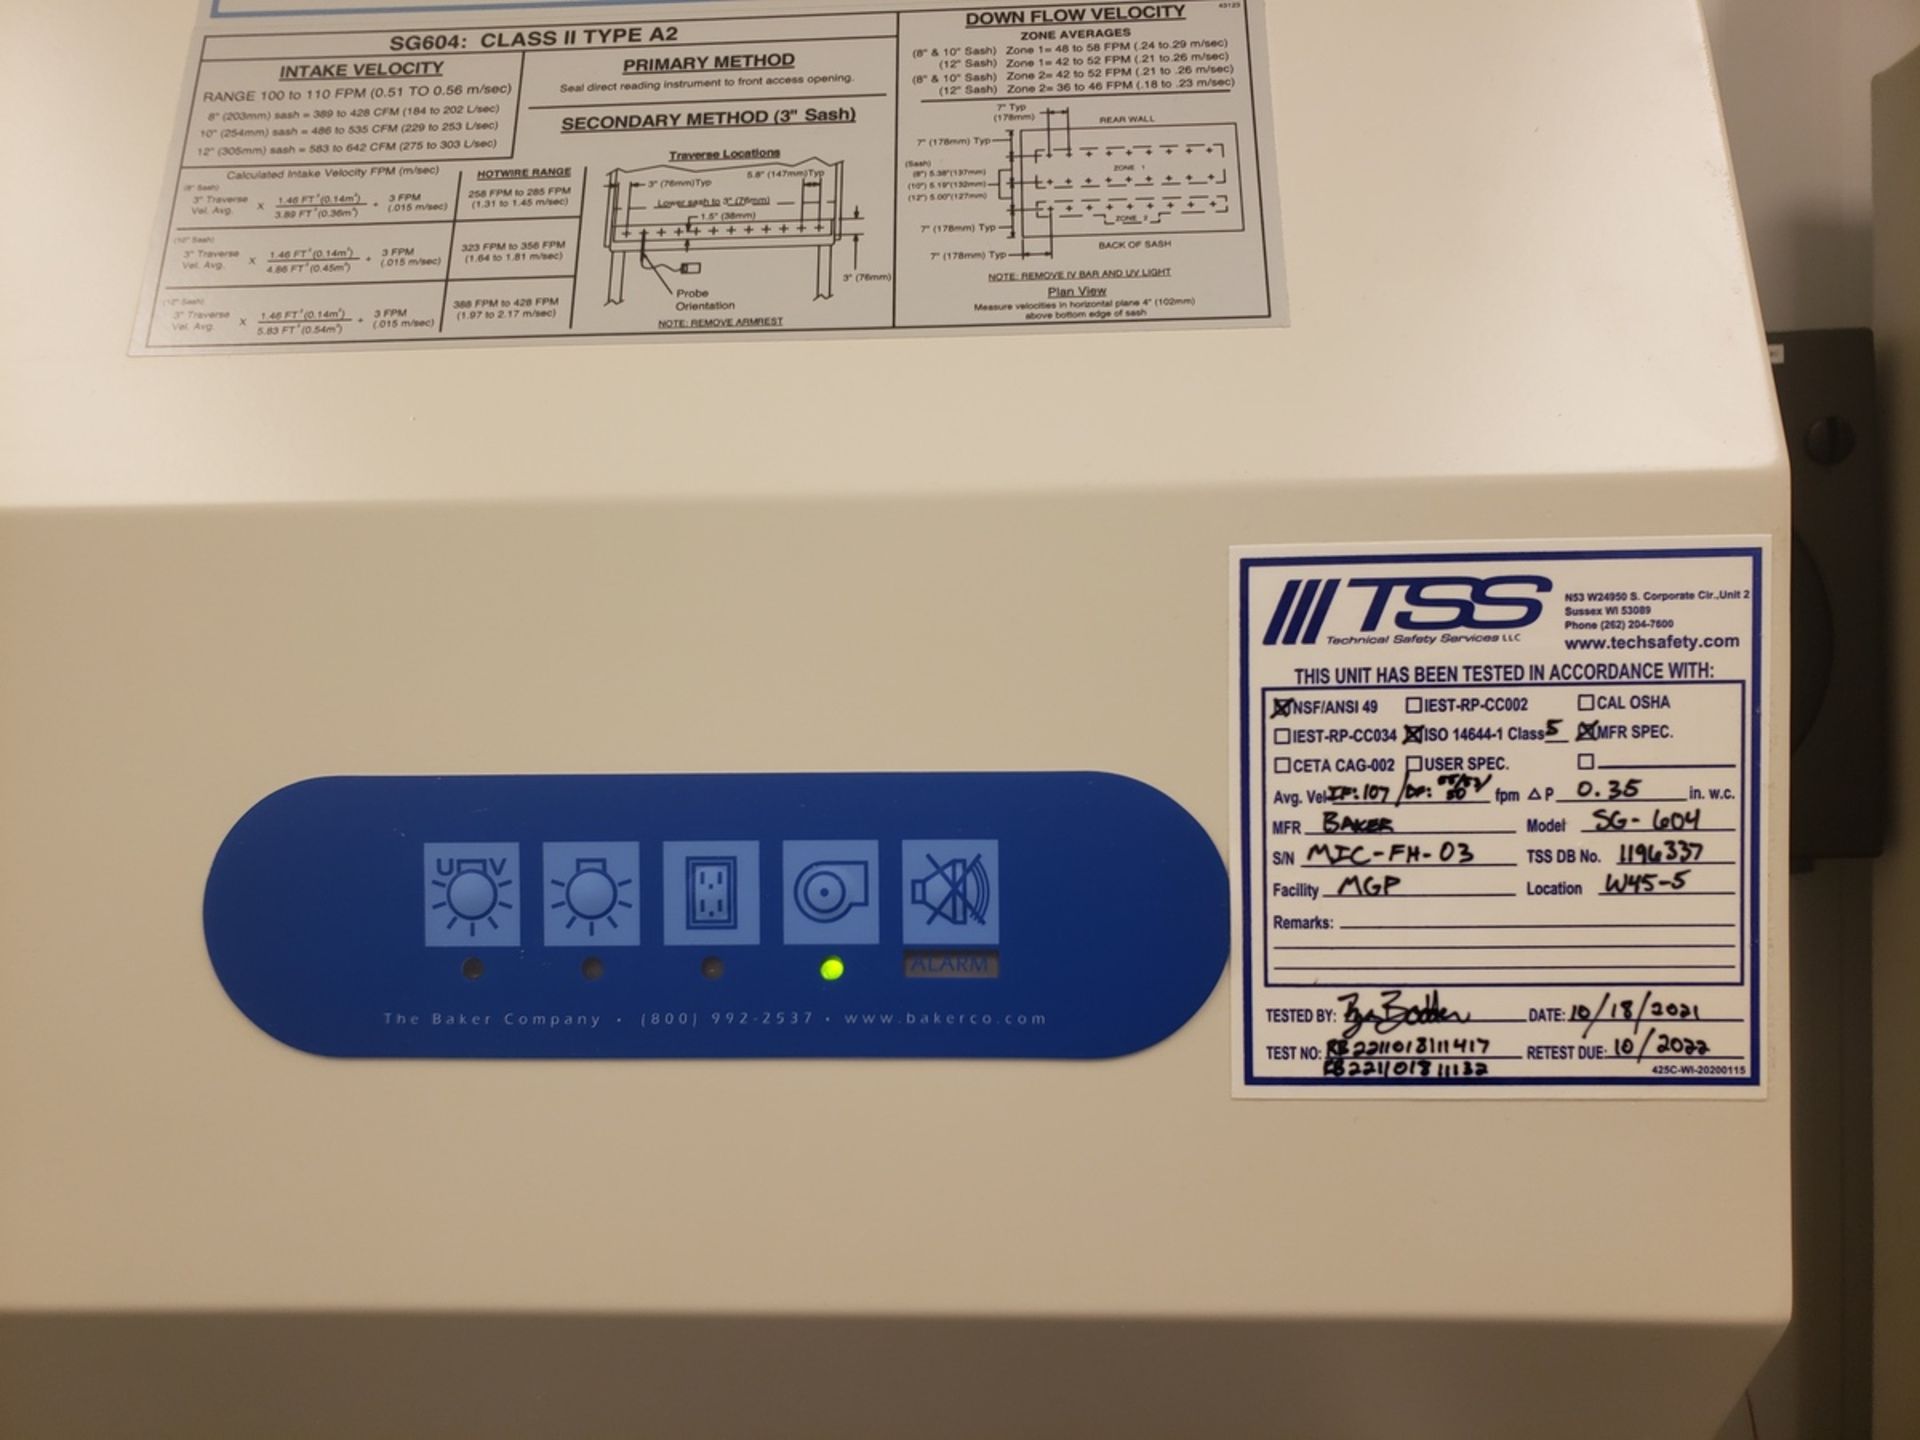 Baker SterilGARD Biosafety Cabinet, M# SG604, S/N 123383 - Image 3 of 3